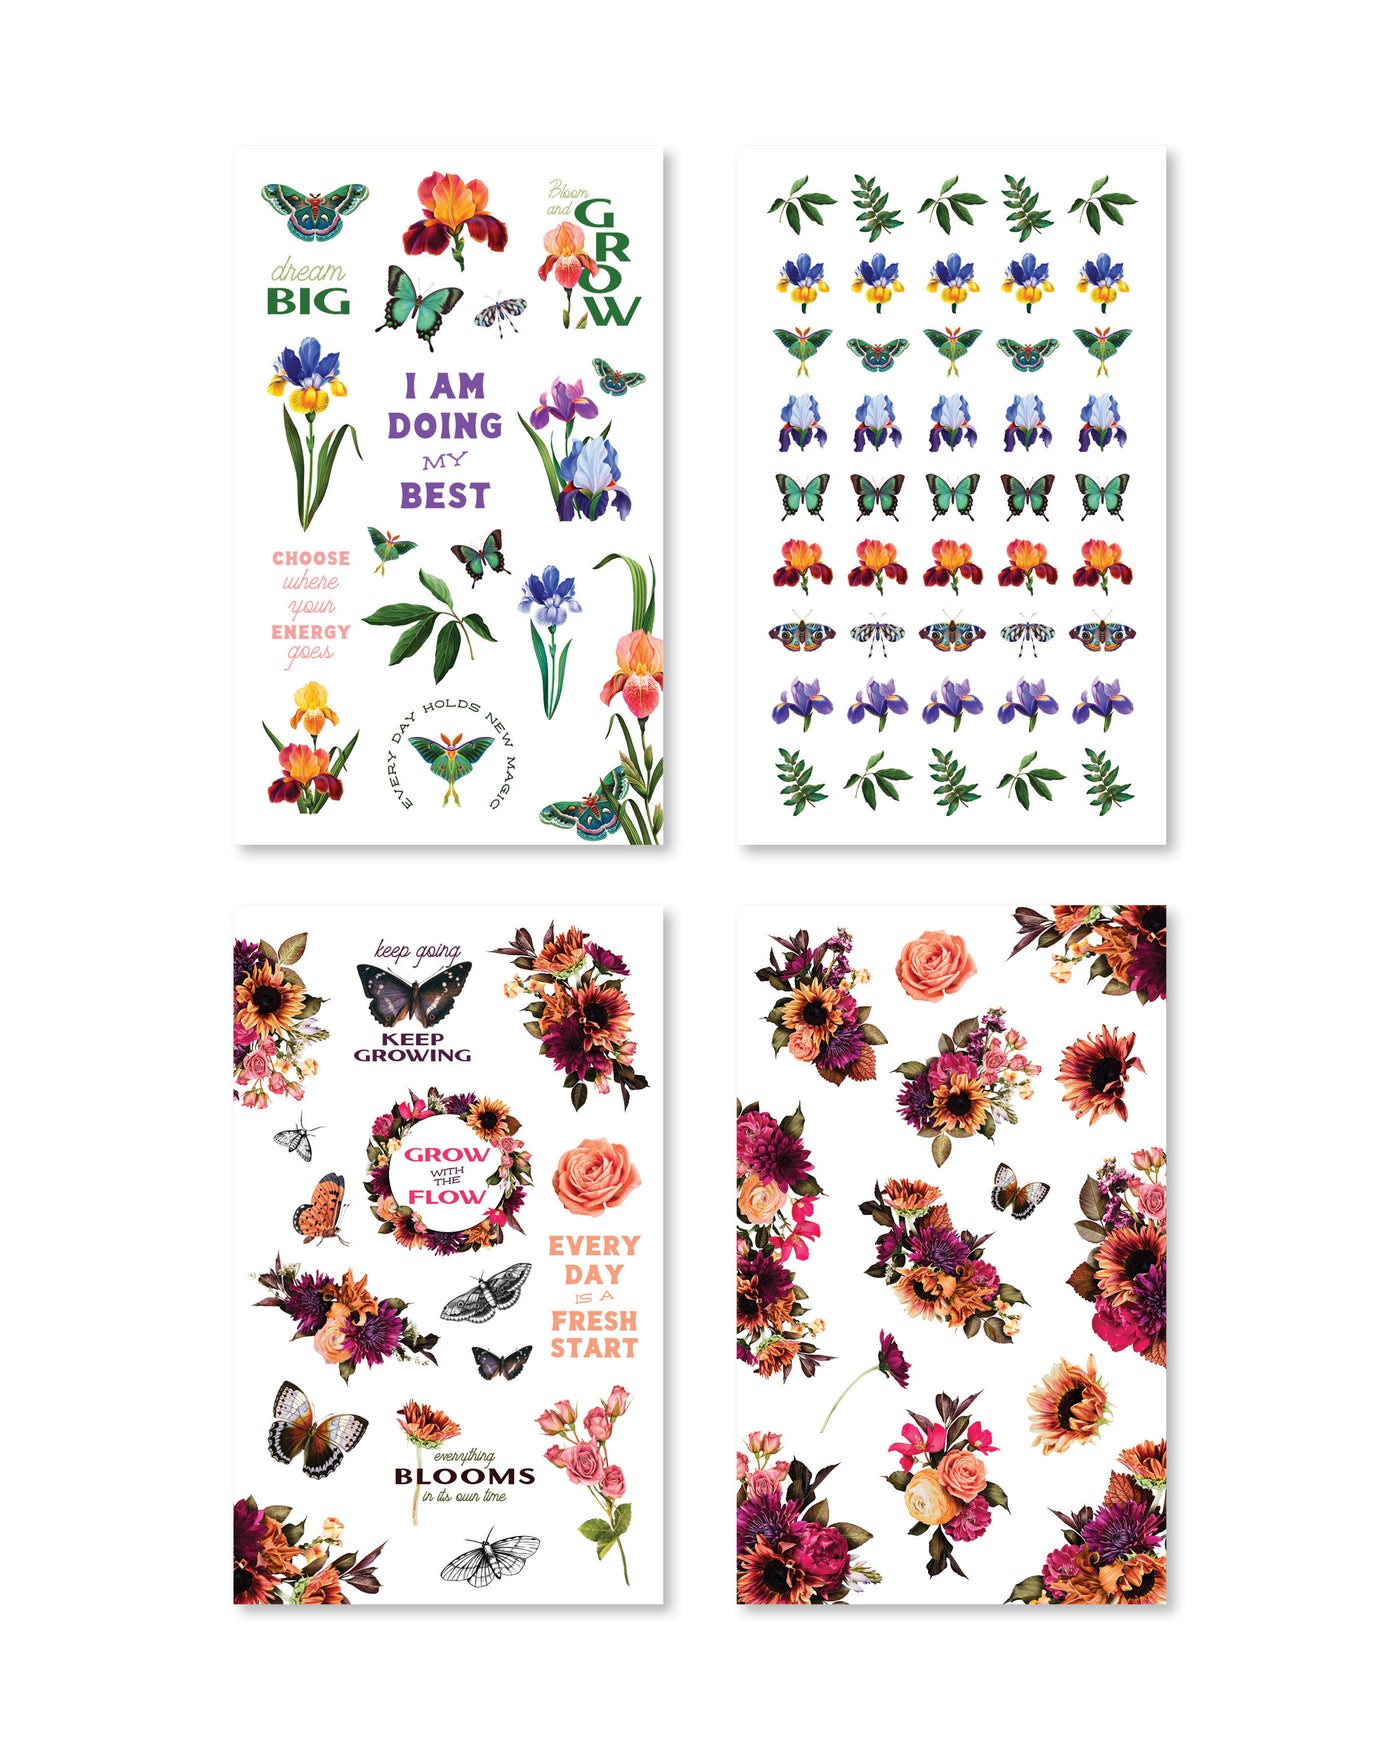 Just Bloom Planner Sticker Book | Decorative Flowers Stickers | Shop Rongrong